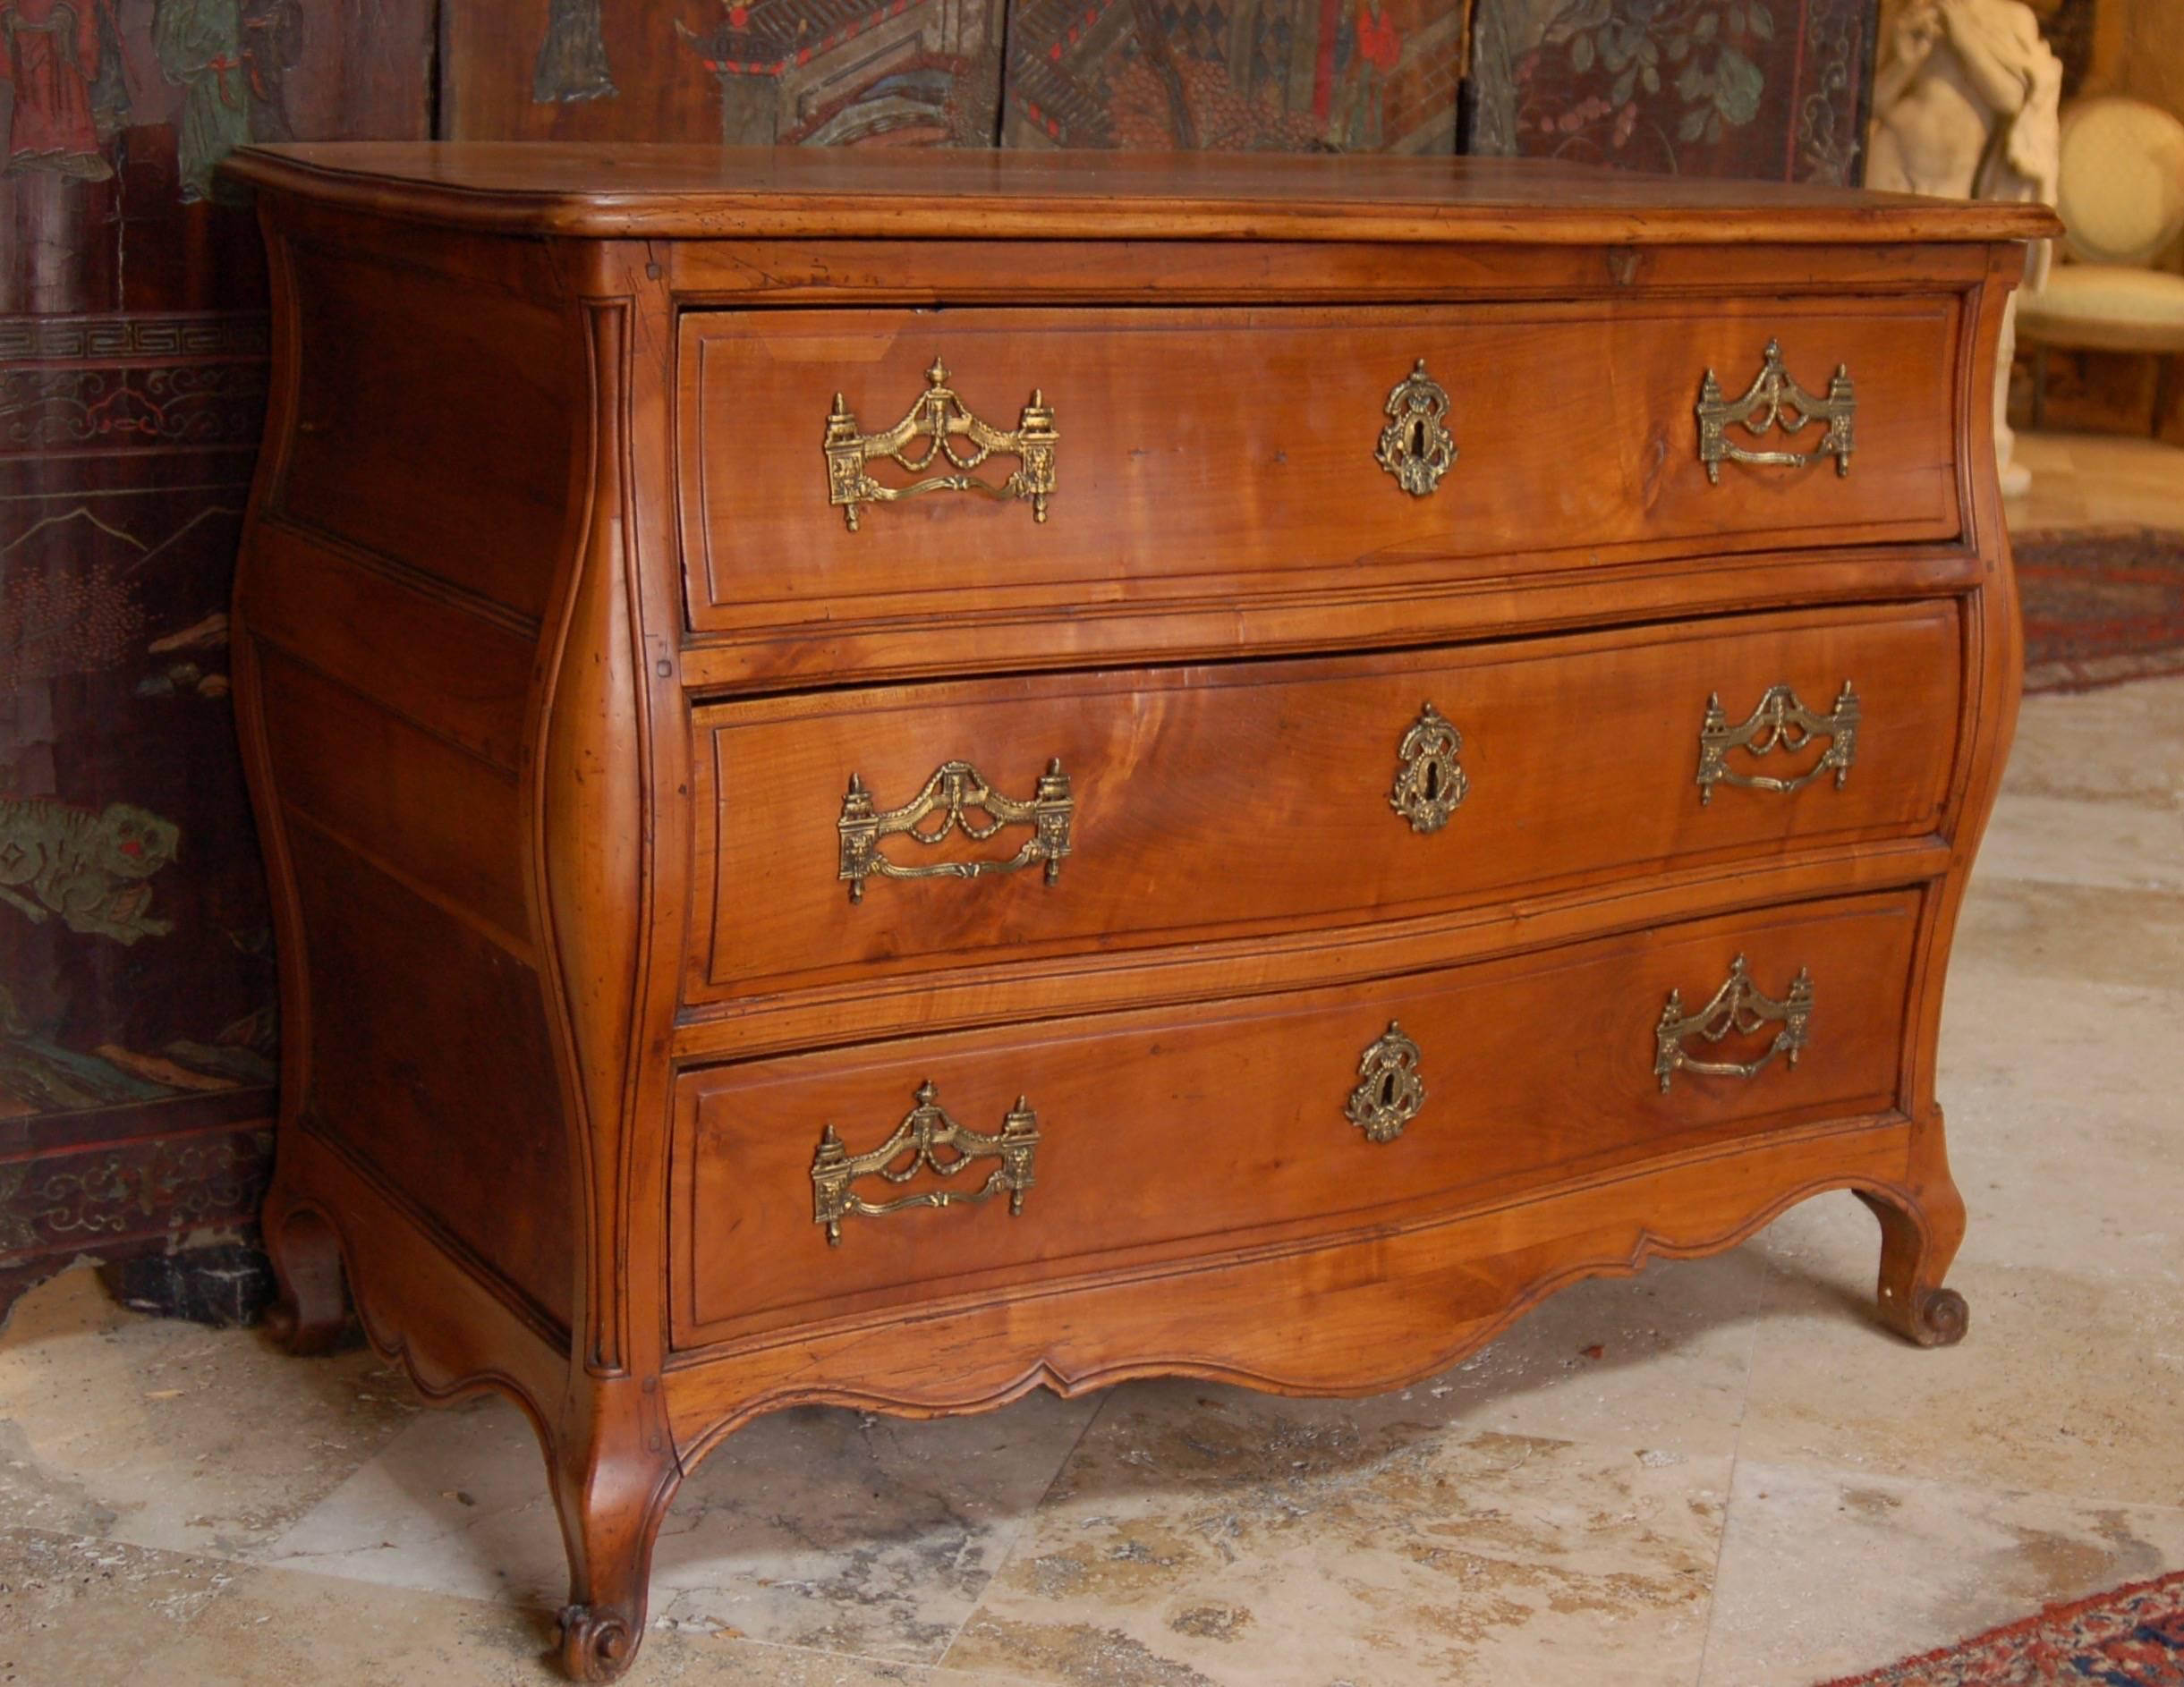 Louis XV period French Bombay commode in solid cherry from Bordeaux, original bronze pulls, exceptional color and design.